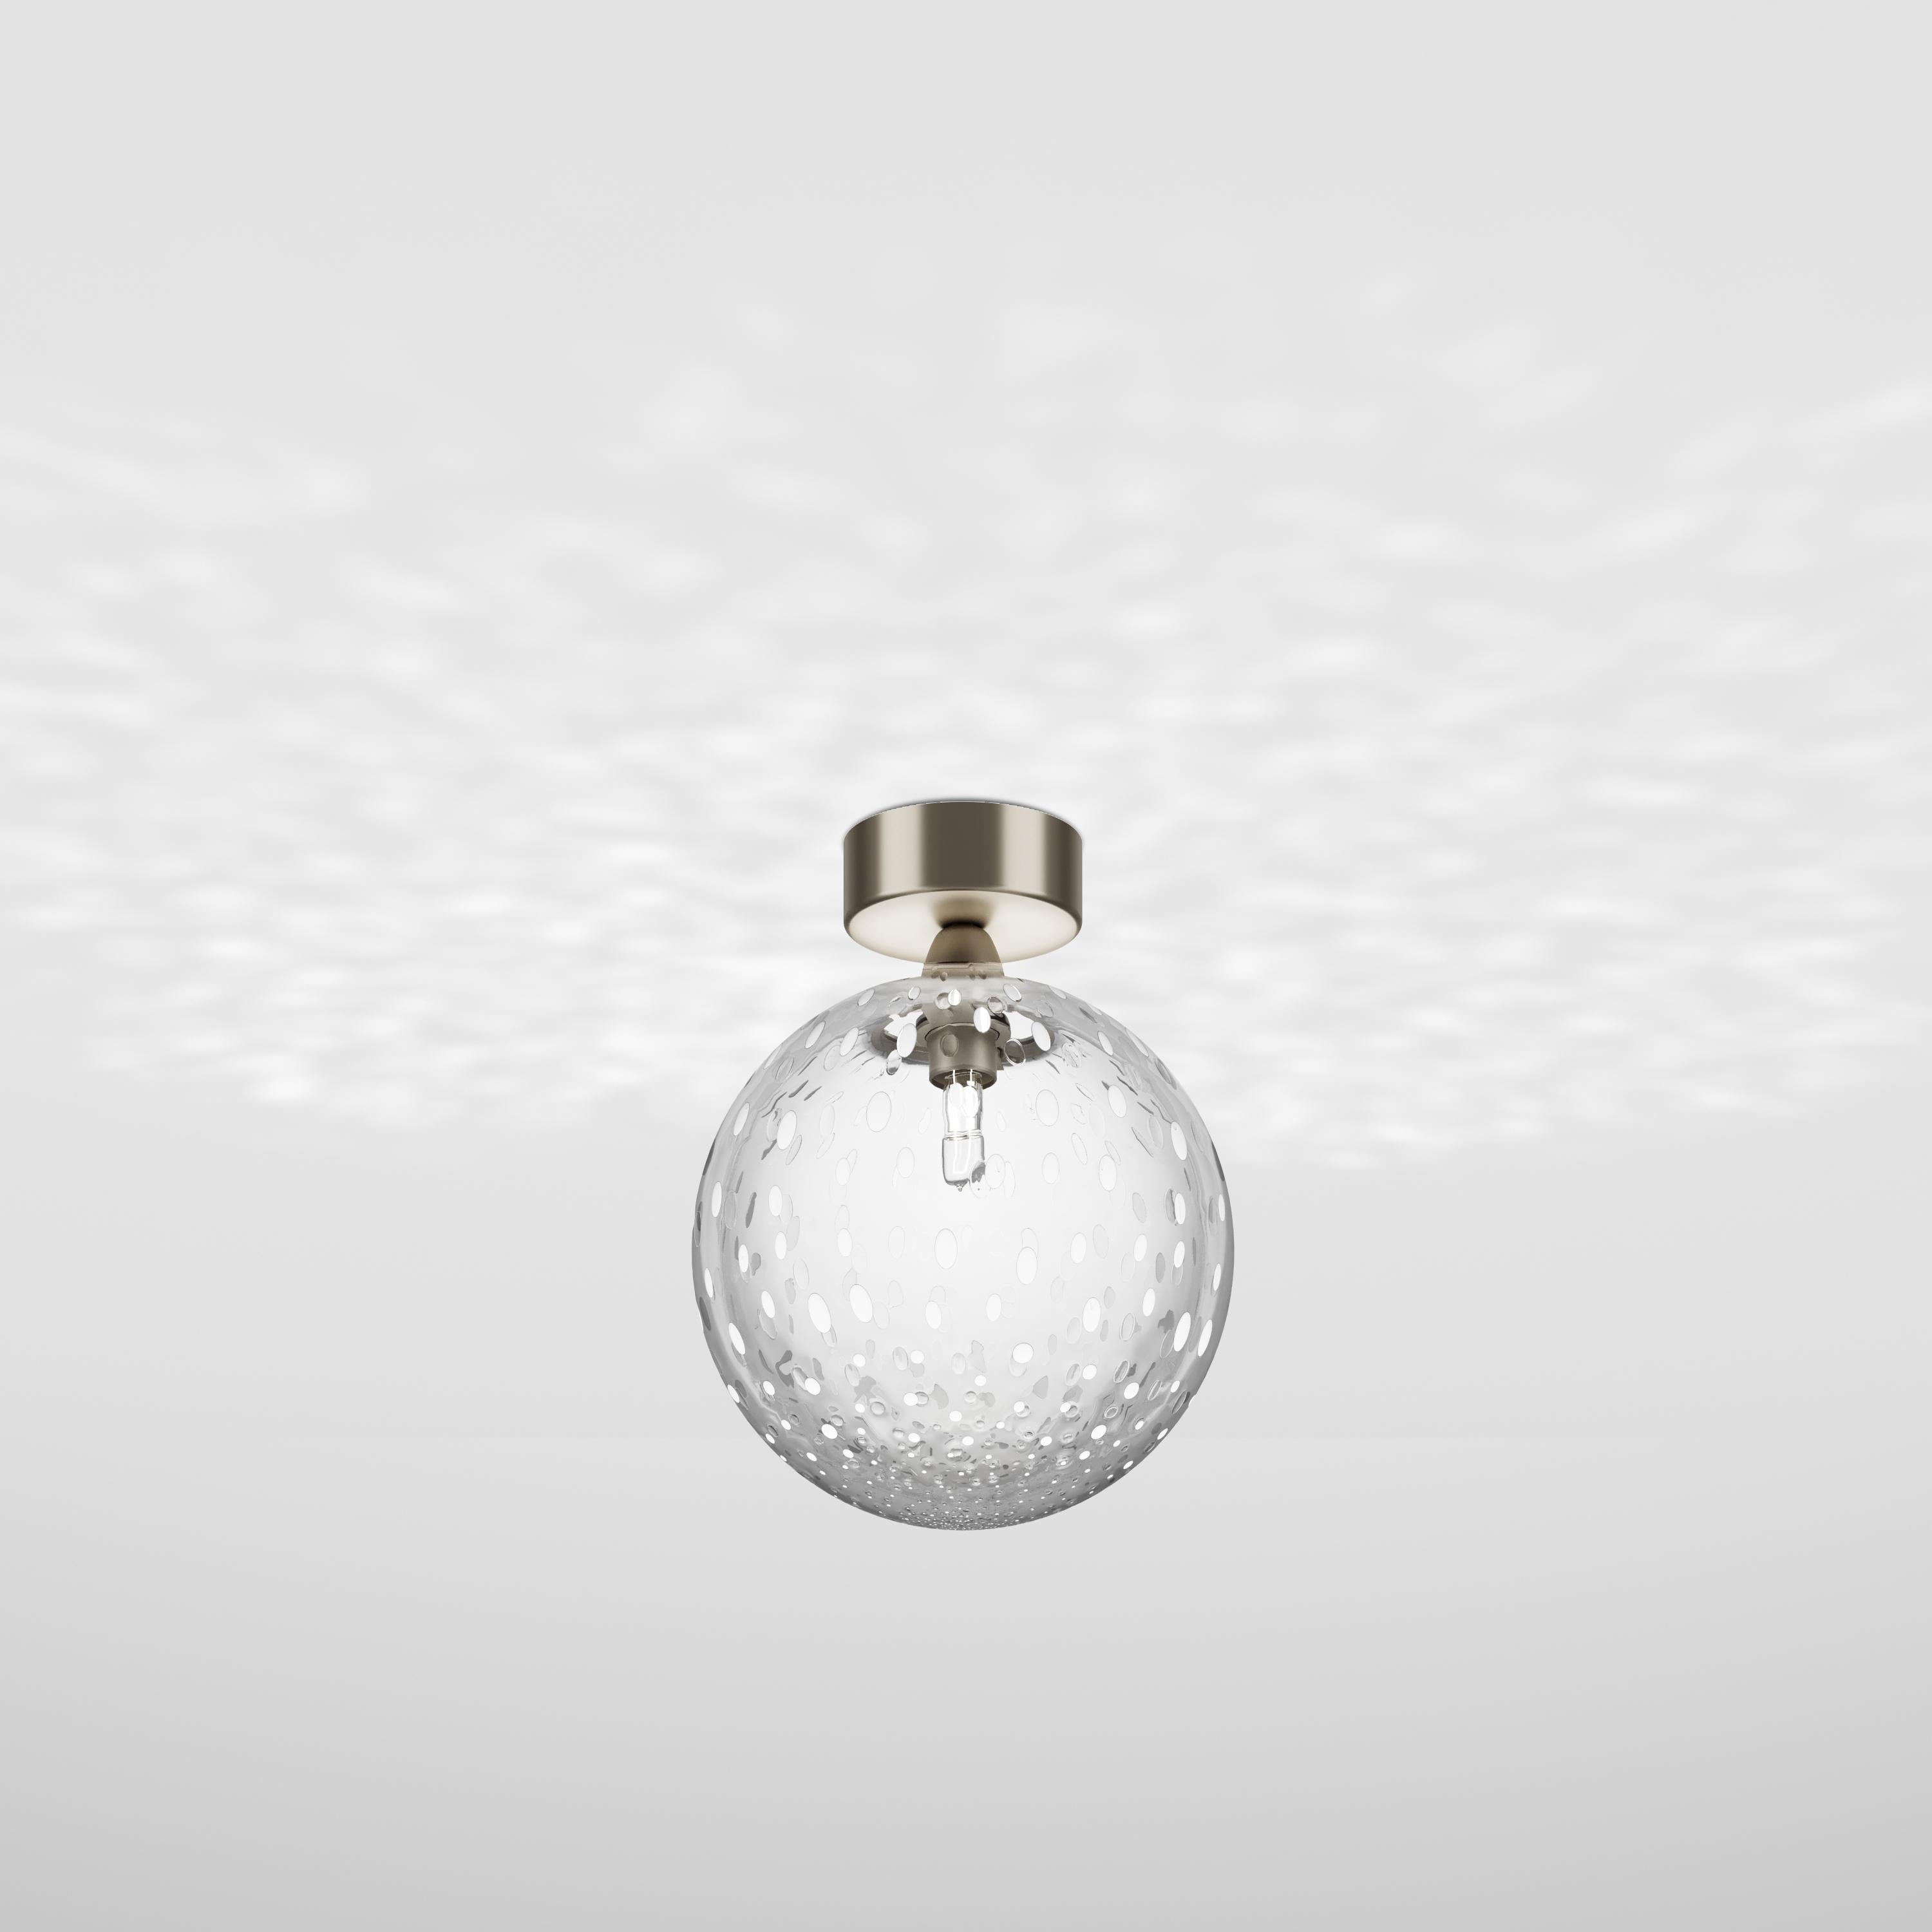 The main characteristic of this collection of lamps produced with the “balloton” technique is the insertion of bubbles of air in the glass during its production. That creates multiple reflections and adds an organic texture on the surface of the